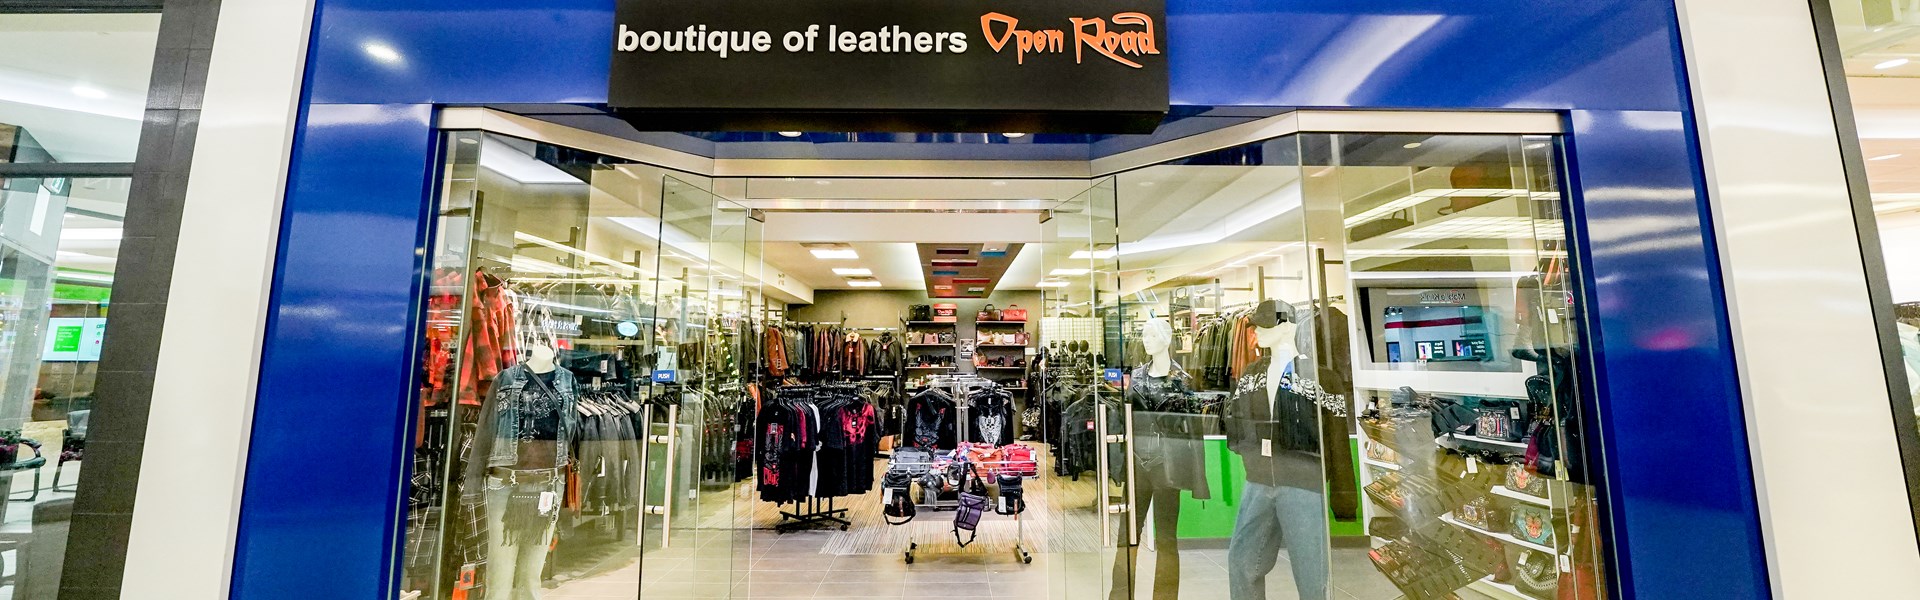 Boutique of Leathers Open Road